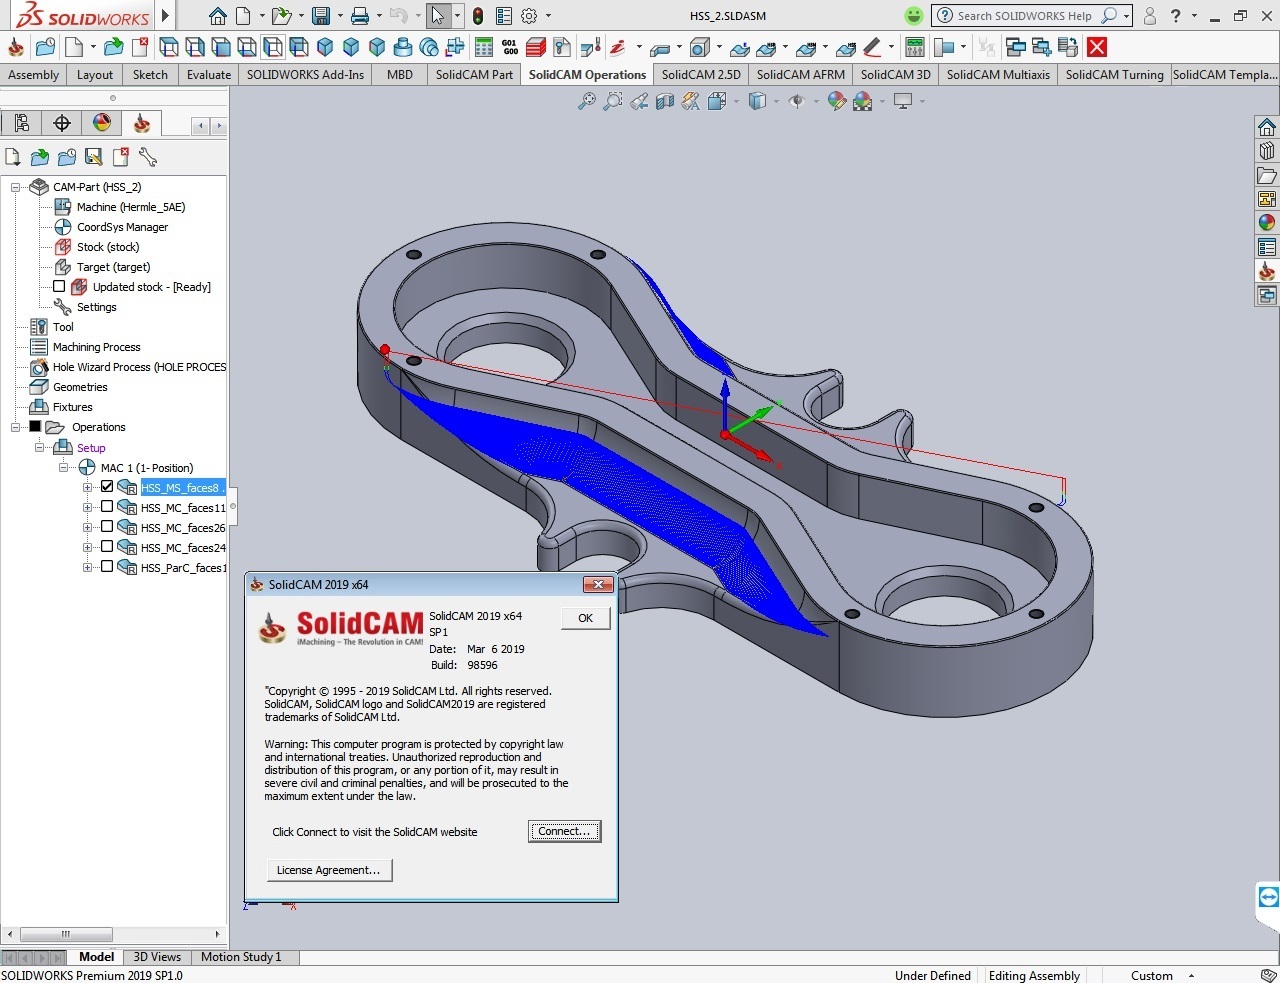 Working with SolidCAM 2019 SP1 for solidworks 2012-2019 full